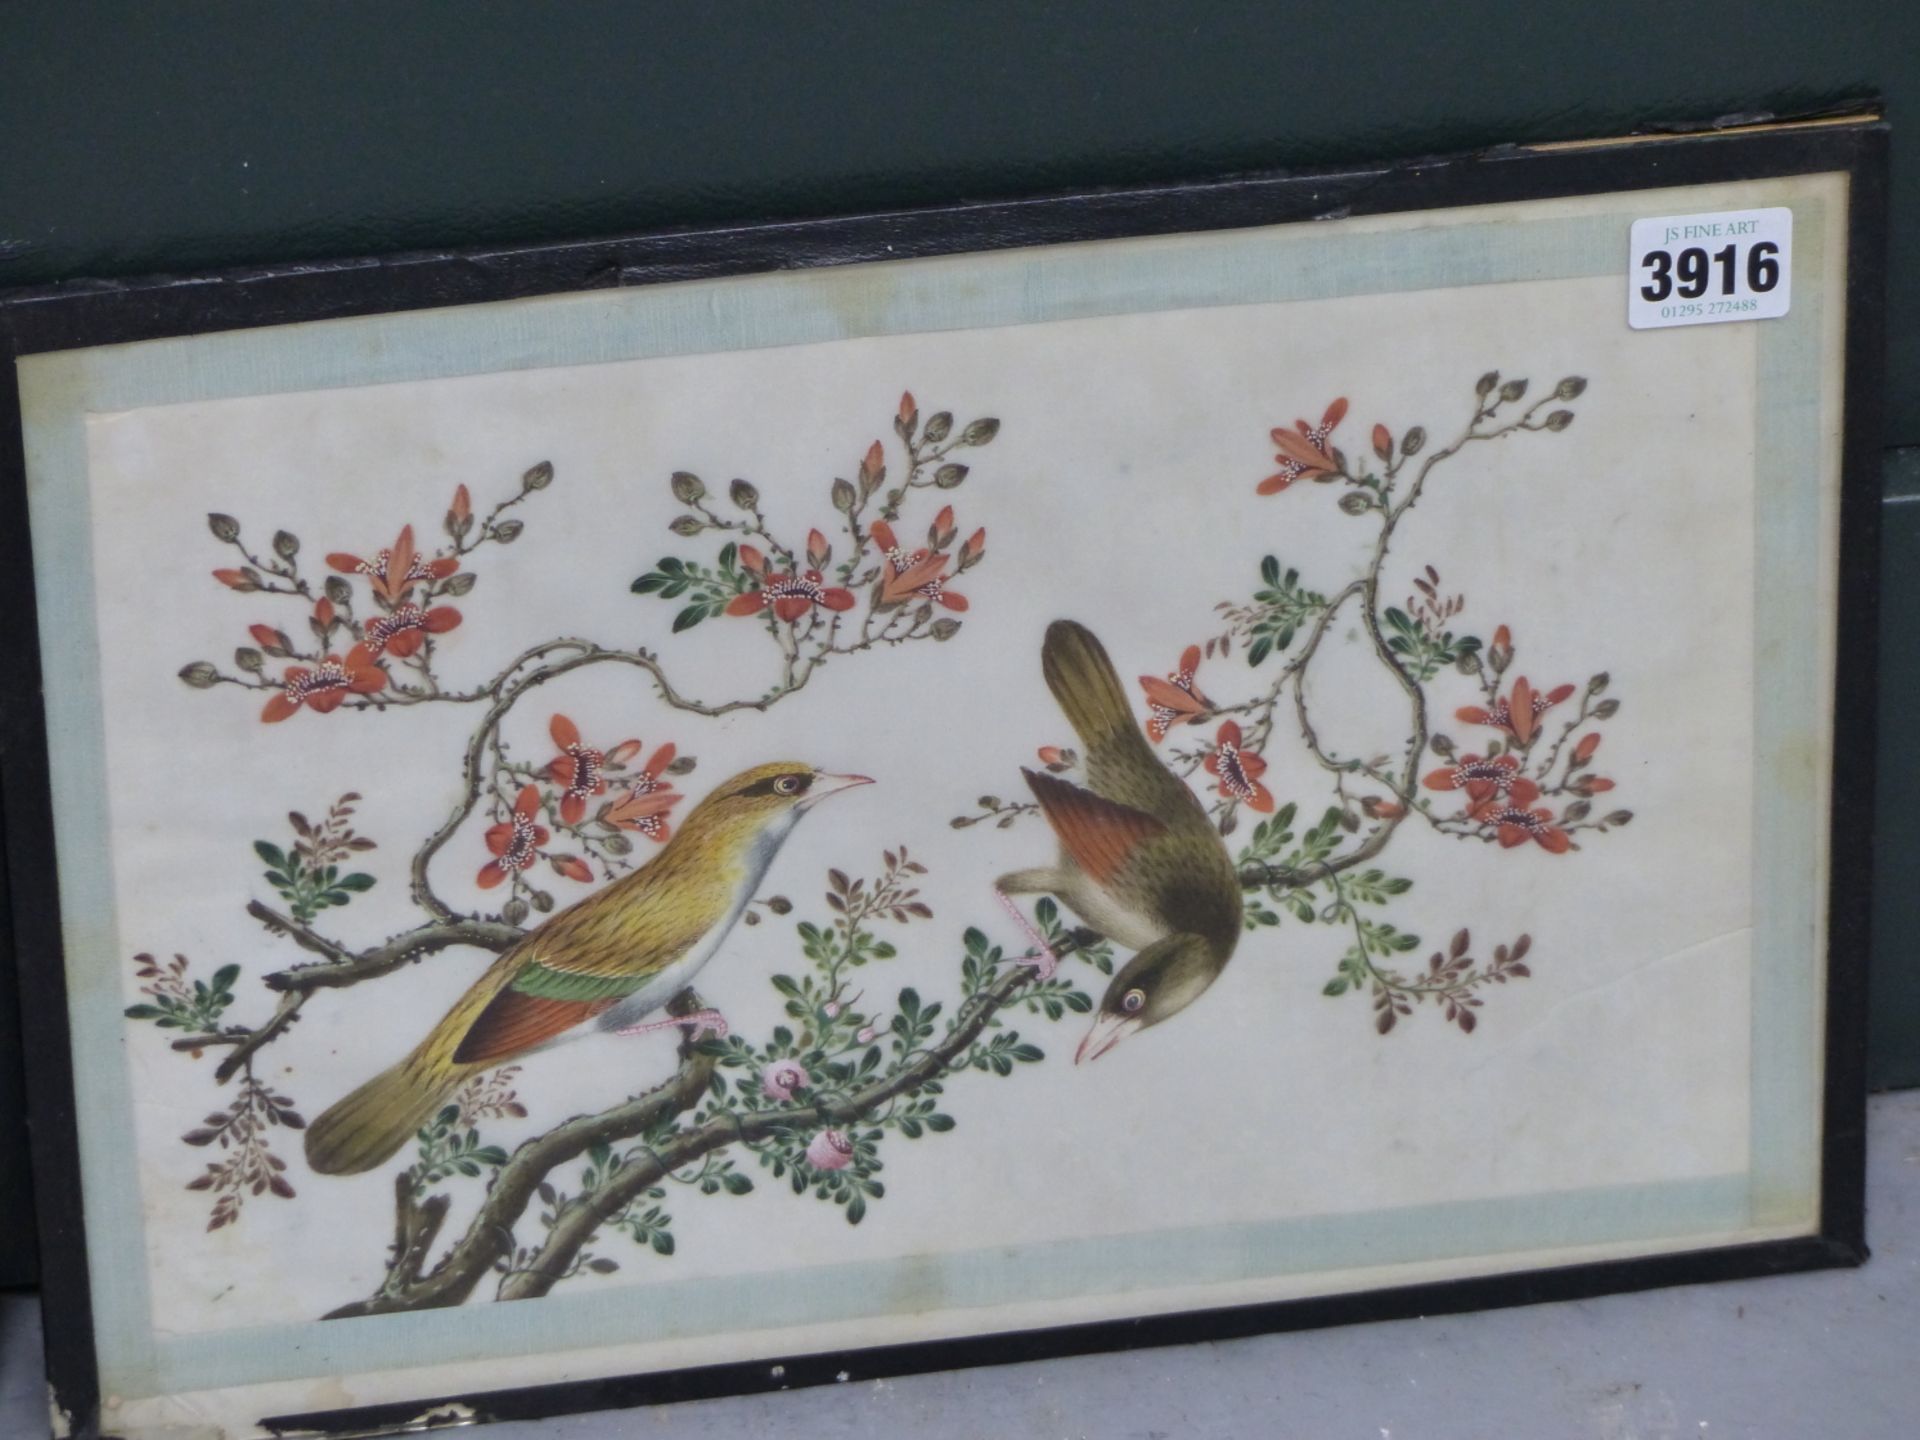 19TH CENTURY CHINESE. EXOTIC BIRDS ON BLOSSOM BRANCHES. WATERCOLOUR ON RICE PAPER. A PAIR. 30 X 19 - Image 3 of 4